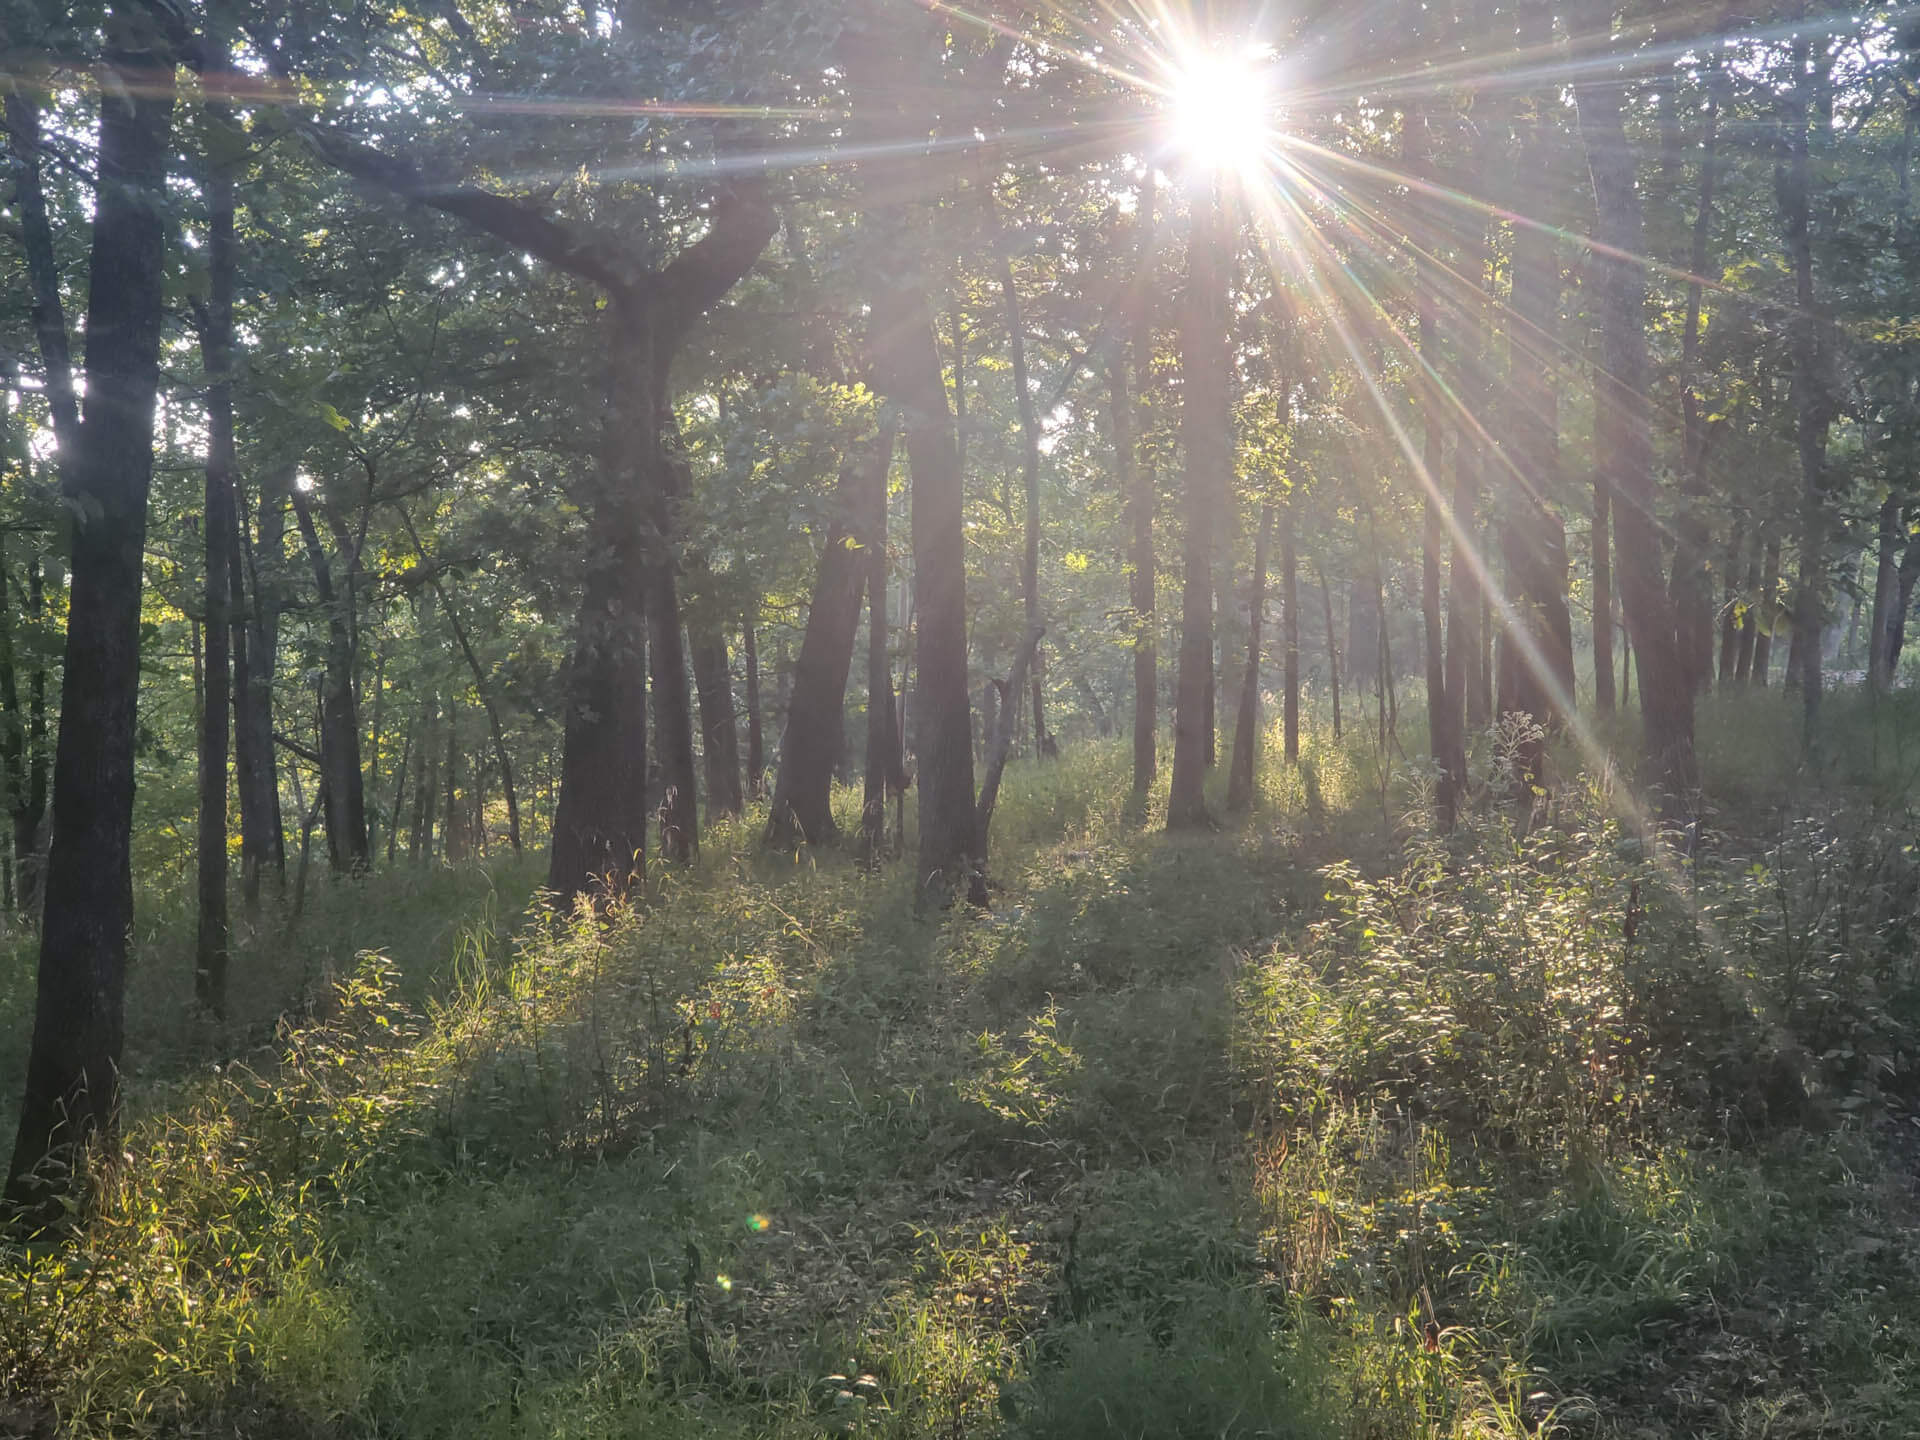 Heartland Forest Consulting LLC professional advice assistance on managing trees and forested resources in the Ashland MO and surrounding areas 29